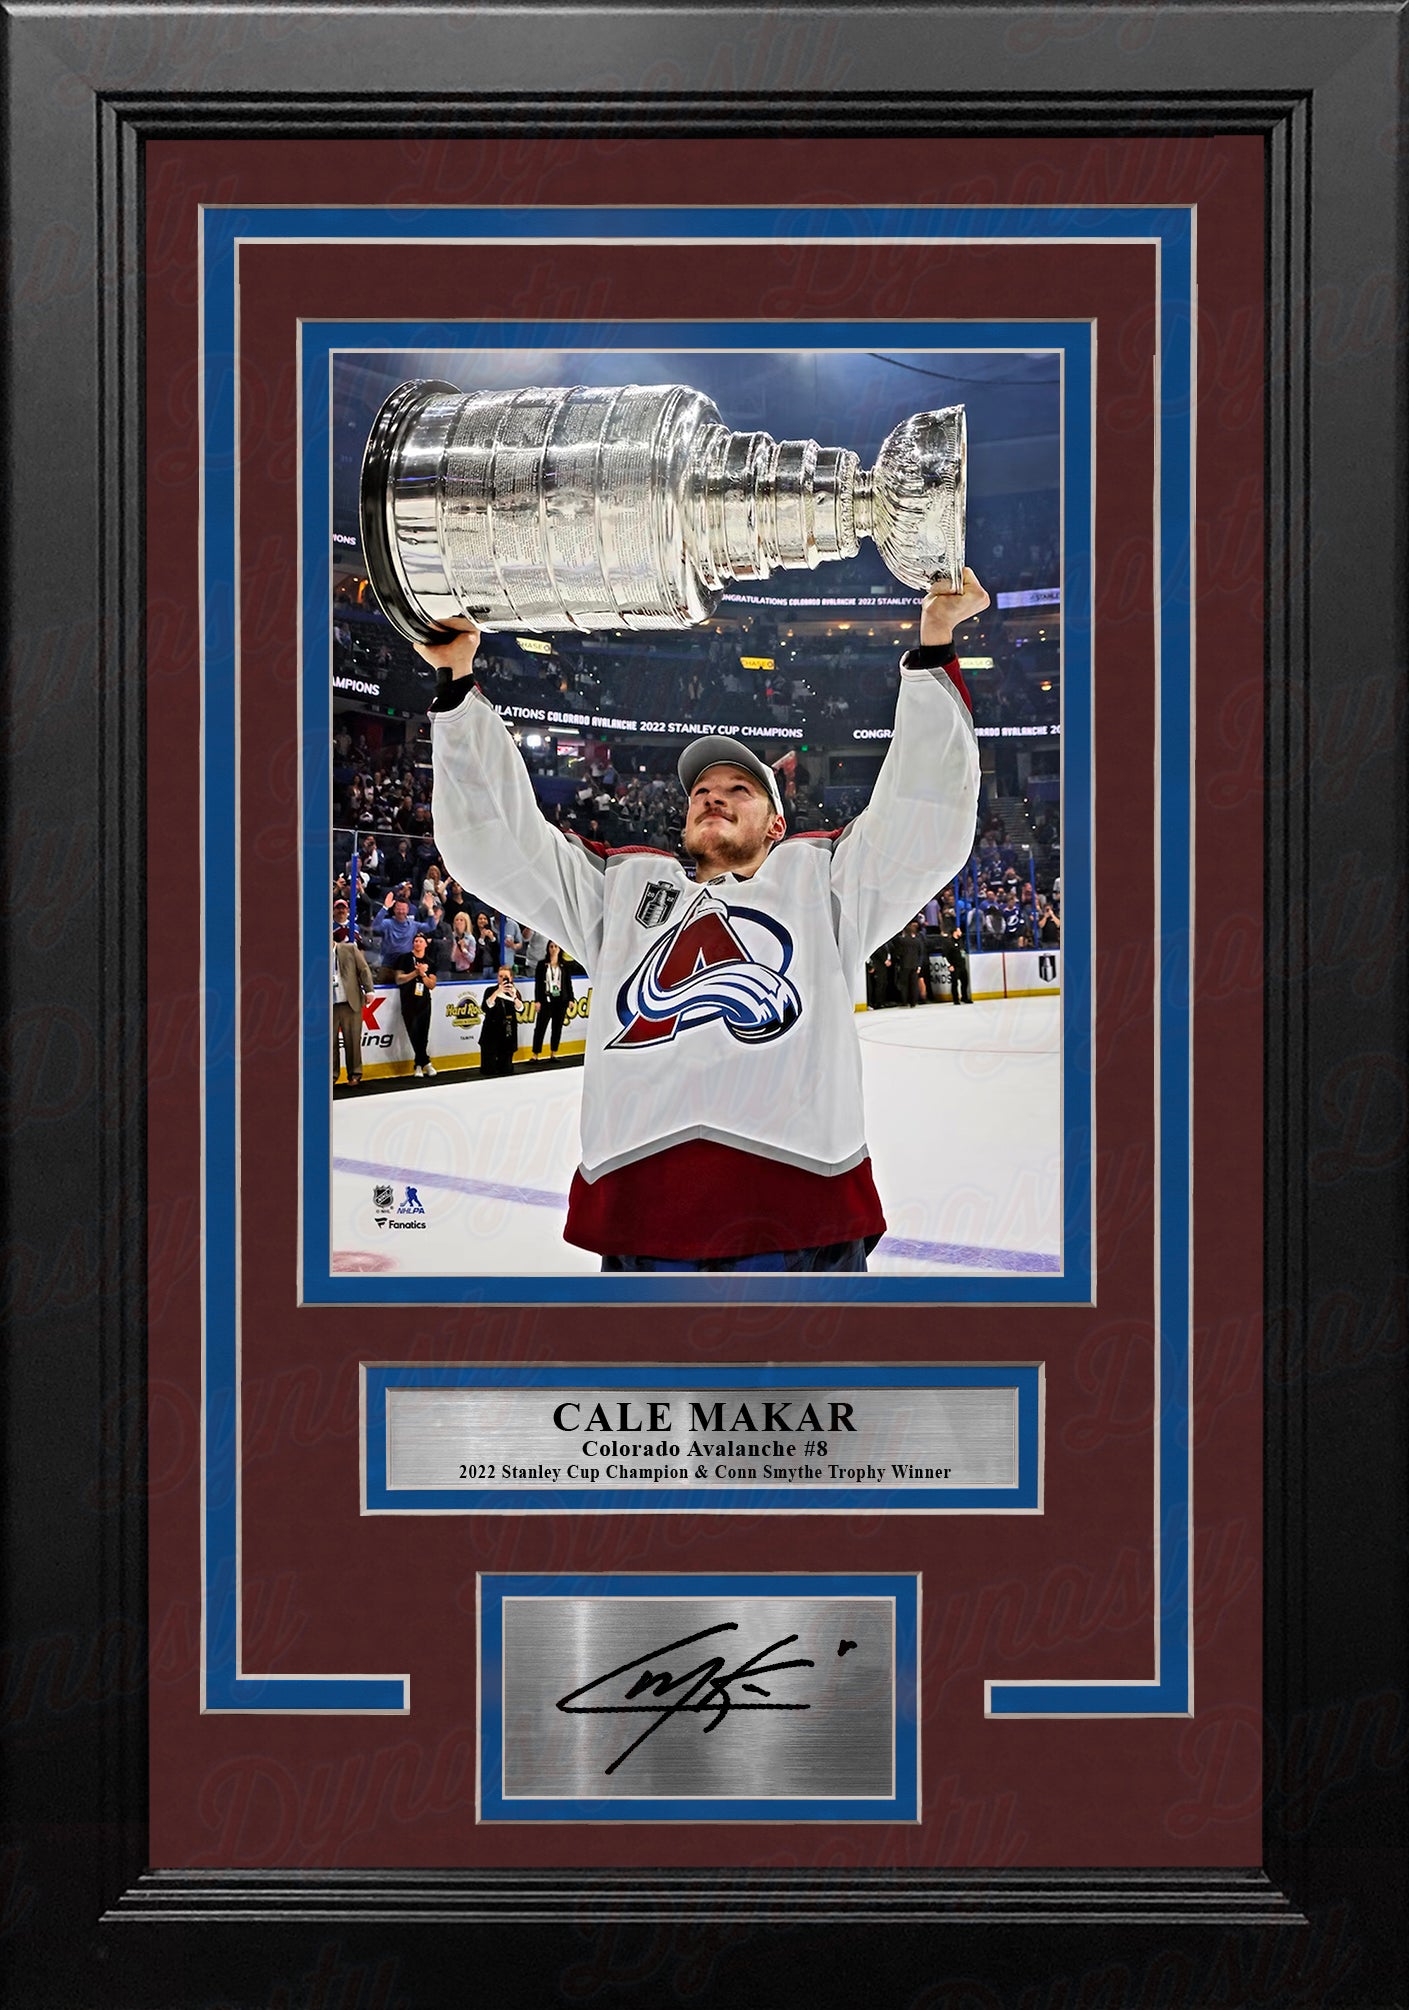 Cale Makar 2022 Stanley Cup Colorado Avalanche 8" x 10" Framed Hockey Photo with Engraved Autograph - Dynasty Sports & Framing 